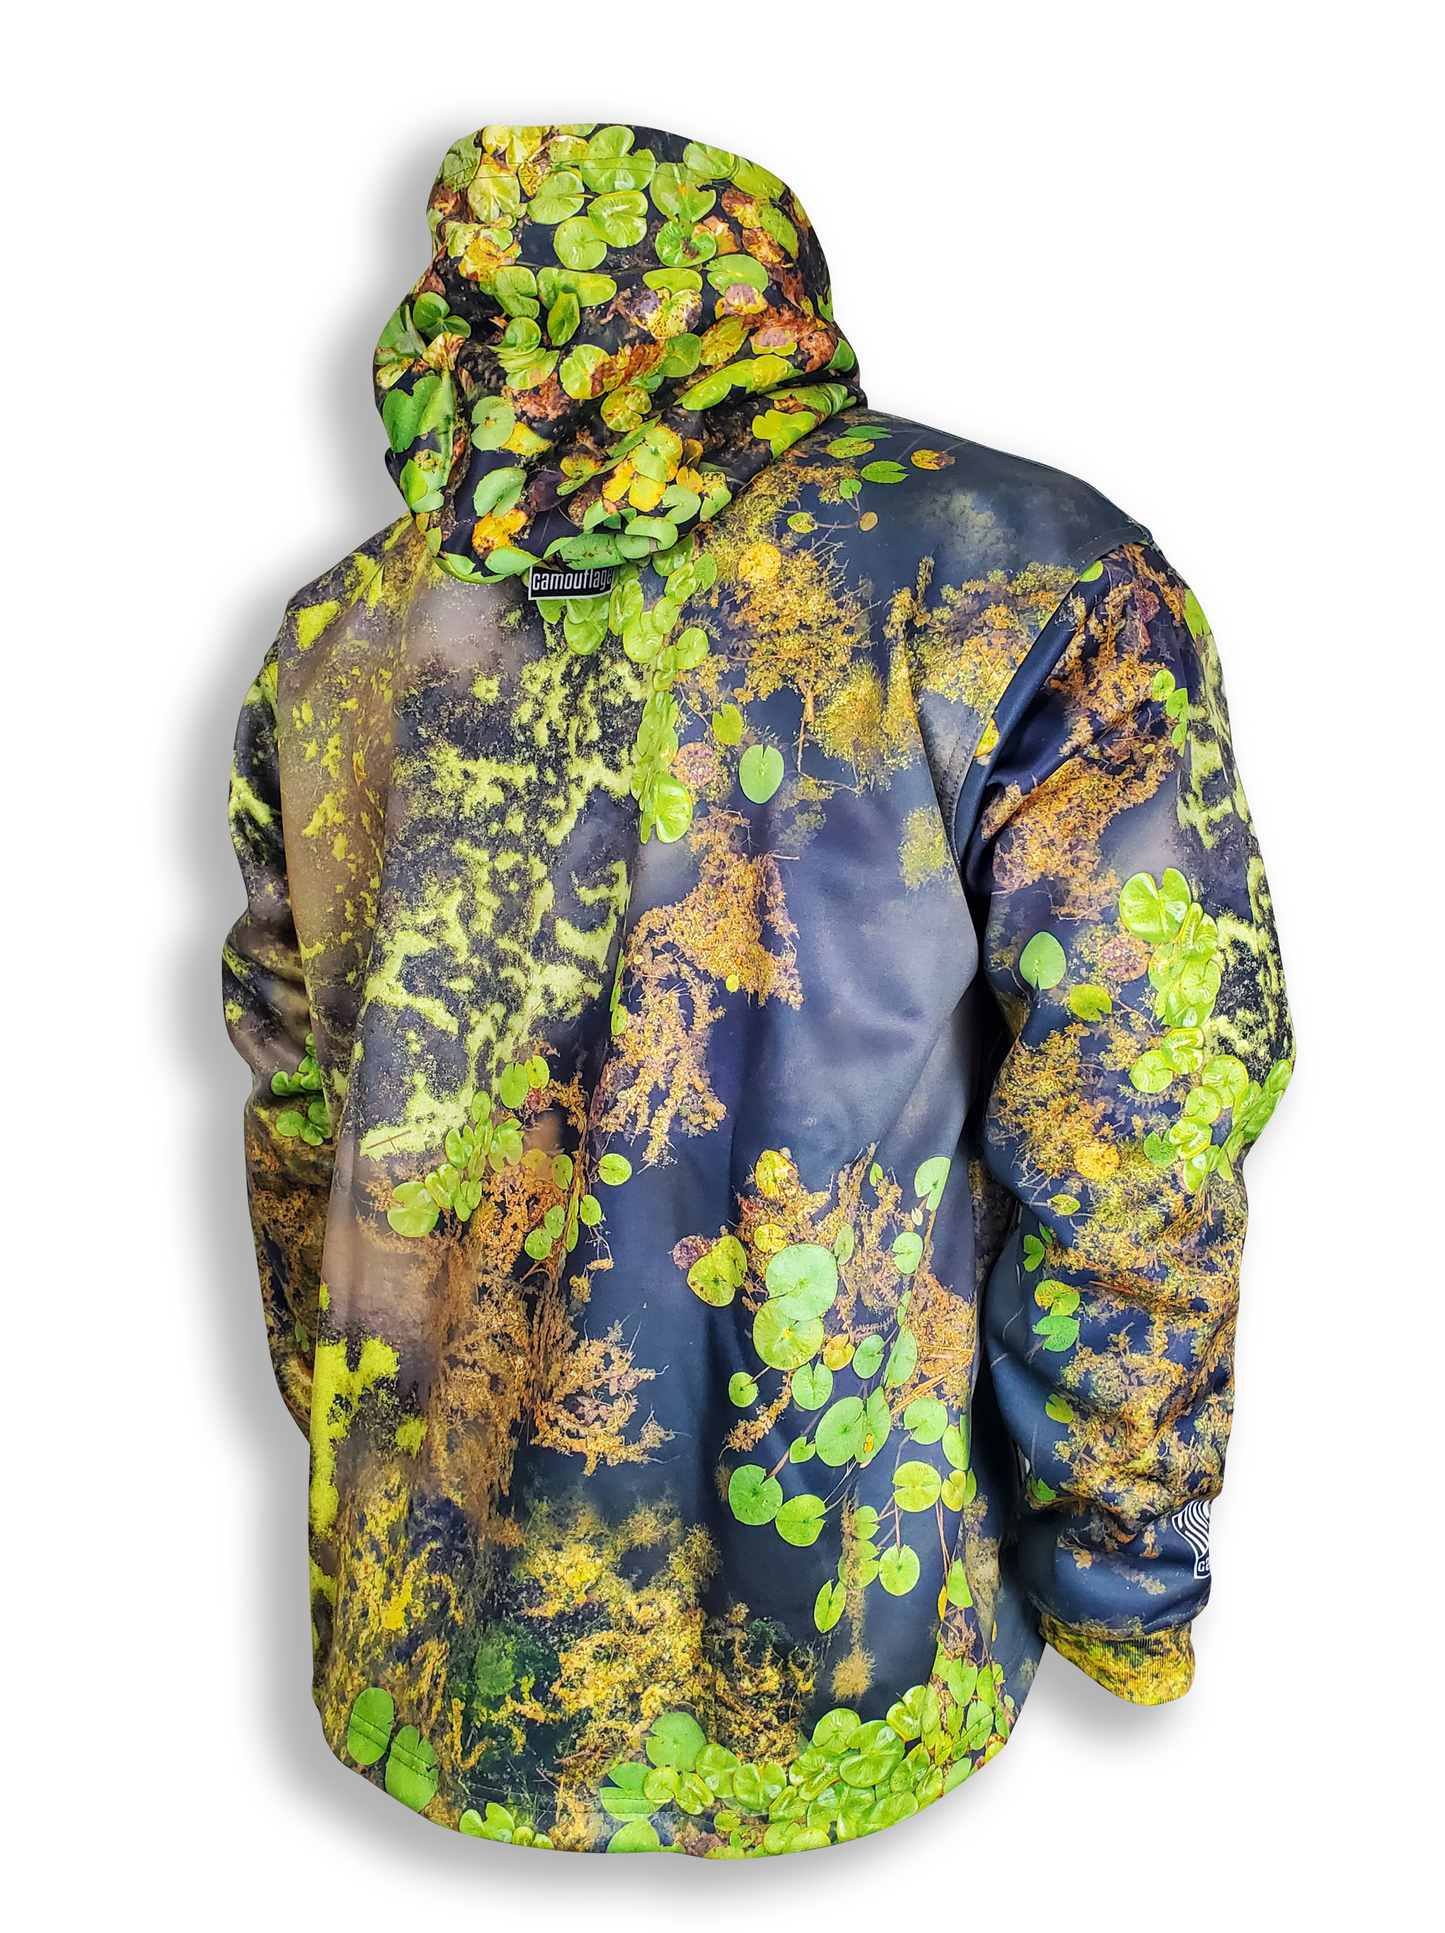 LIFESTYLE Fishing Apparel - Slop Camo - Hoodie